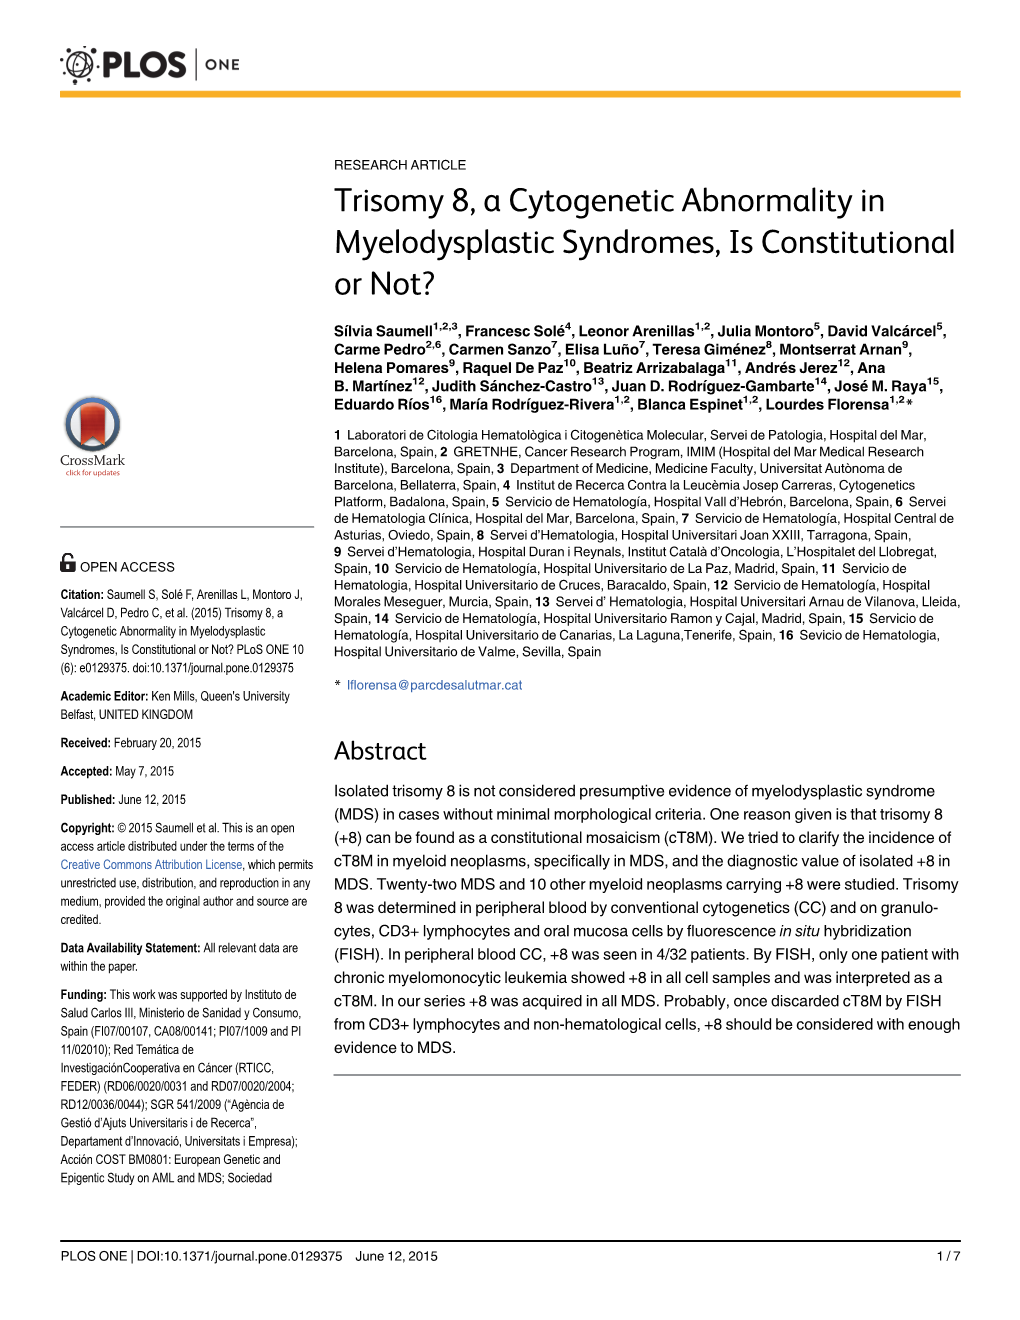 Trisomy 8, a Cytogenetic Abnormality in Myelodysplastic Syndromes, Is Constitutional Or Not?